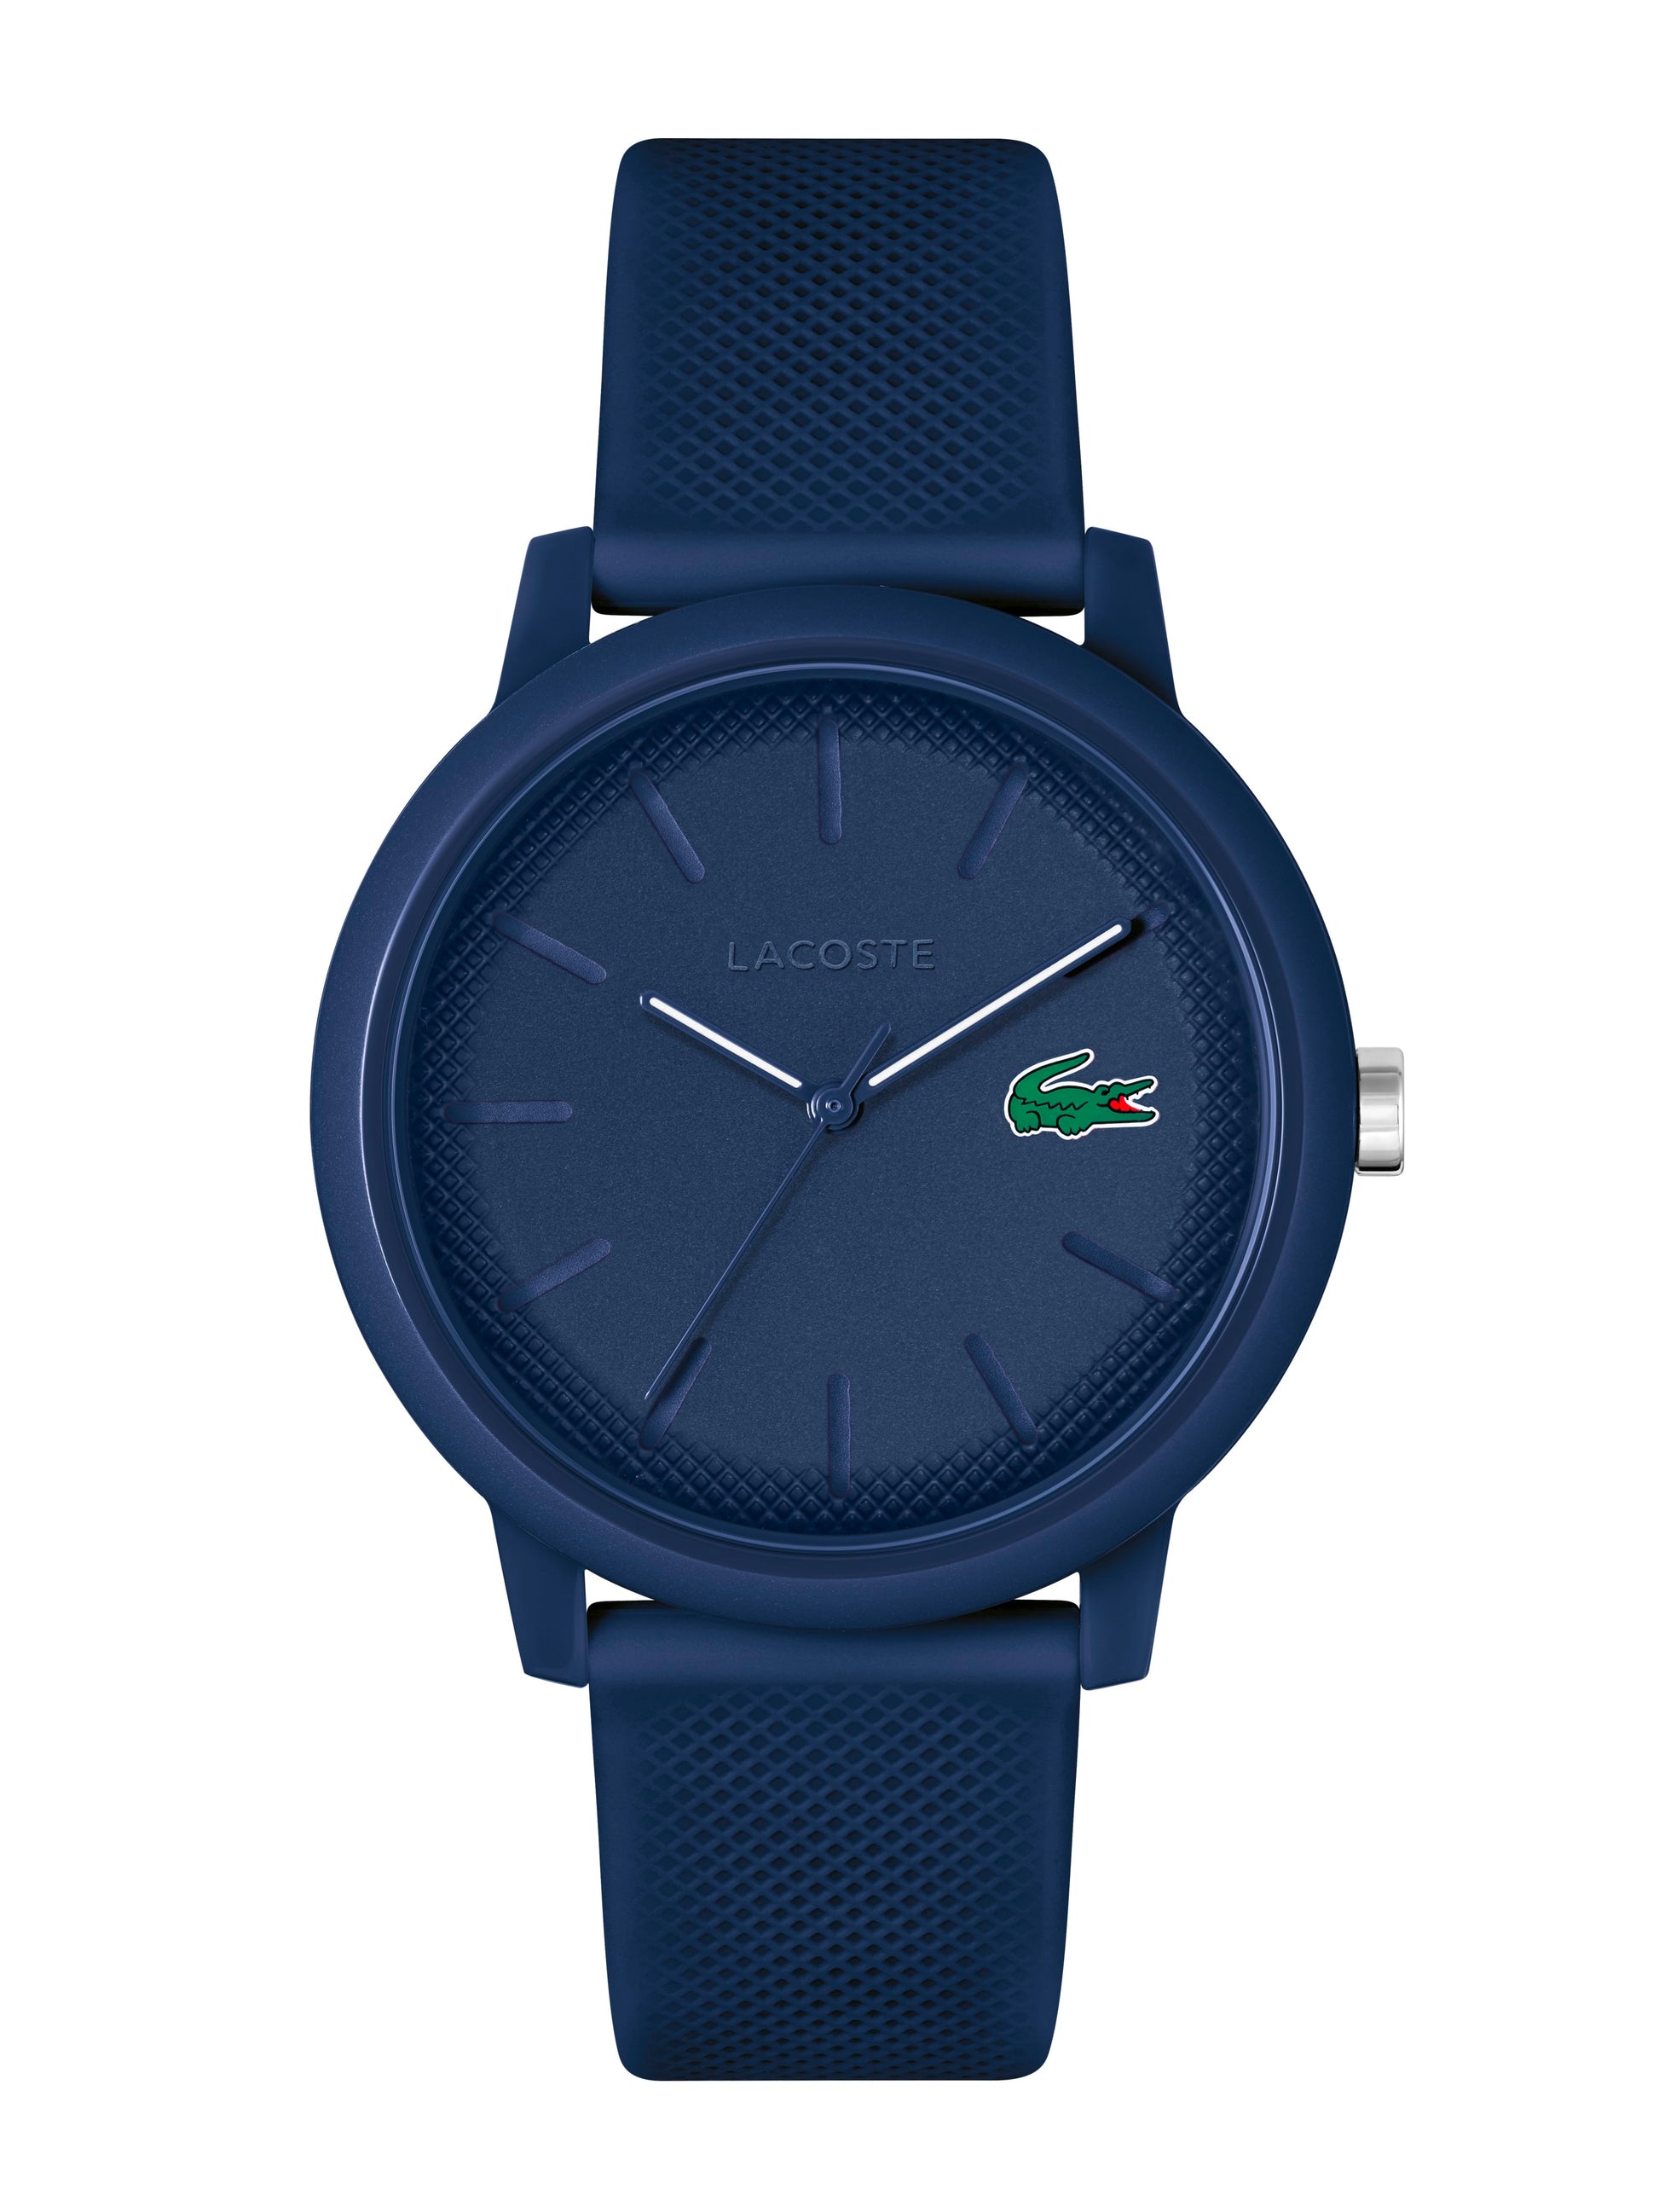 Introducing the MenÕs Lacoste.12.12 Blue Watch 2011172 by Lacoste, featuring a contemporary design and impressive water resistance. This stunning timepiece perfectly embodies the essence of a Lacoste watch.